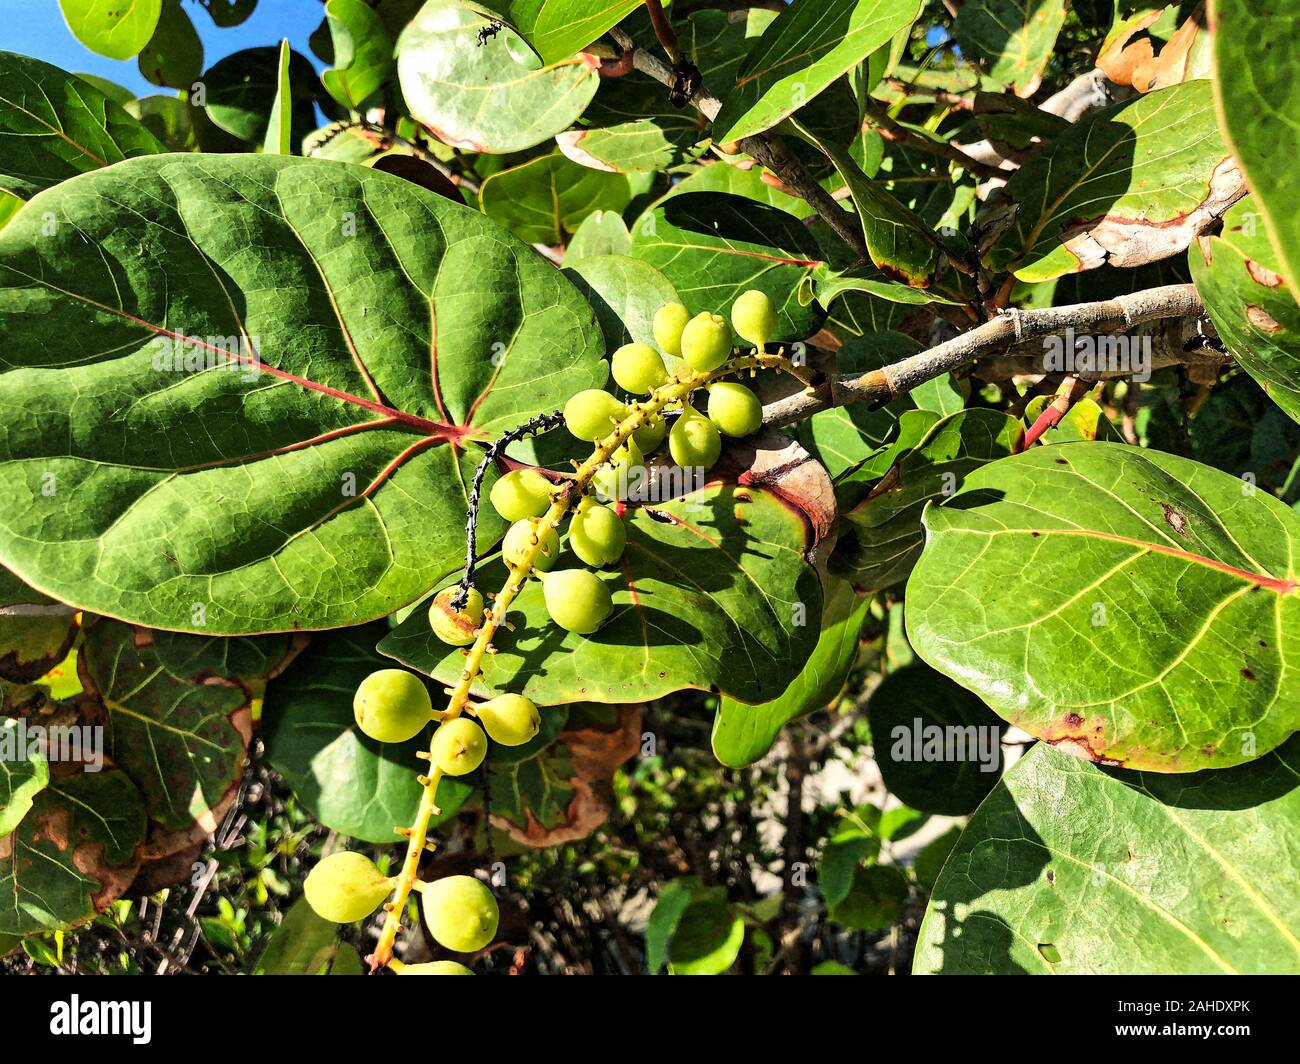 sea grapes on the beach in South Florida Stock Photo